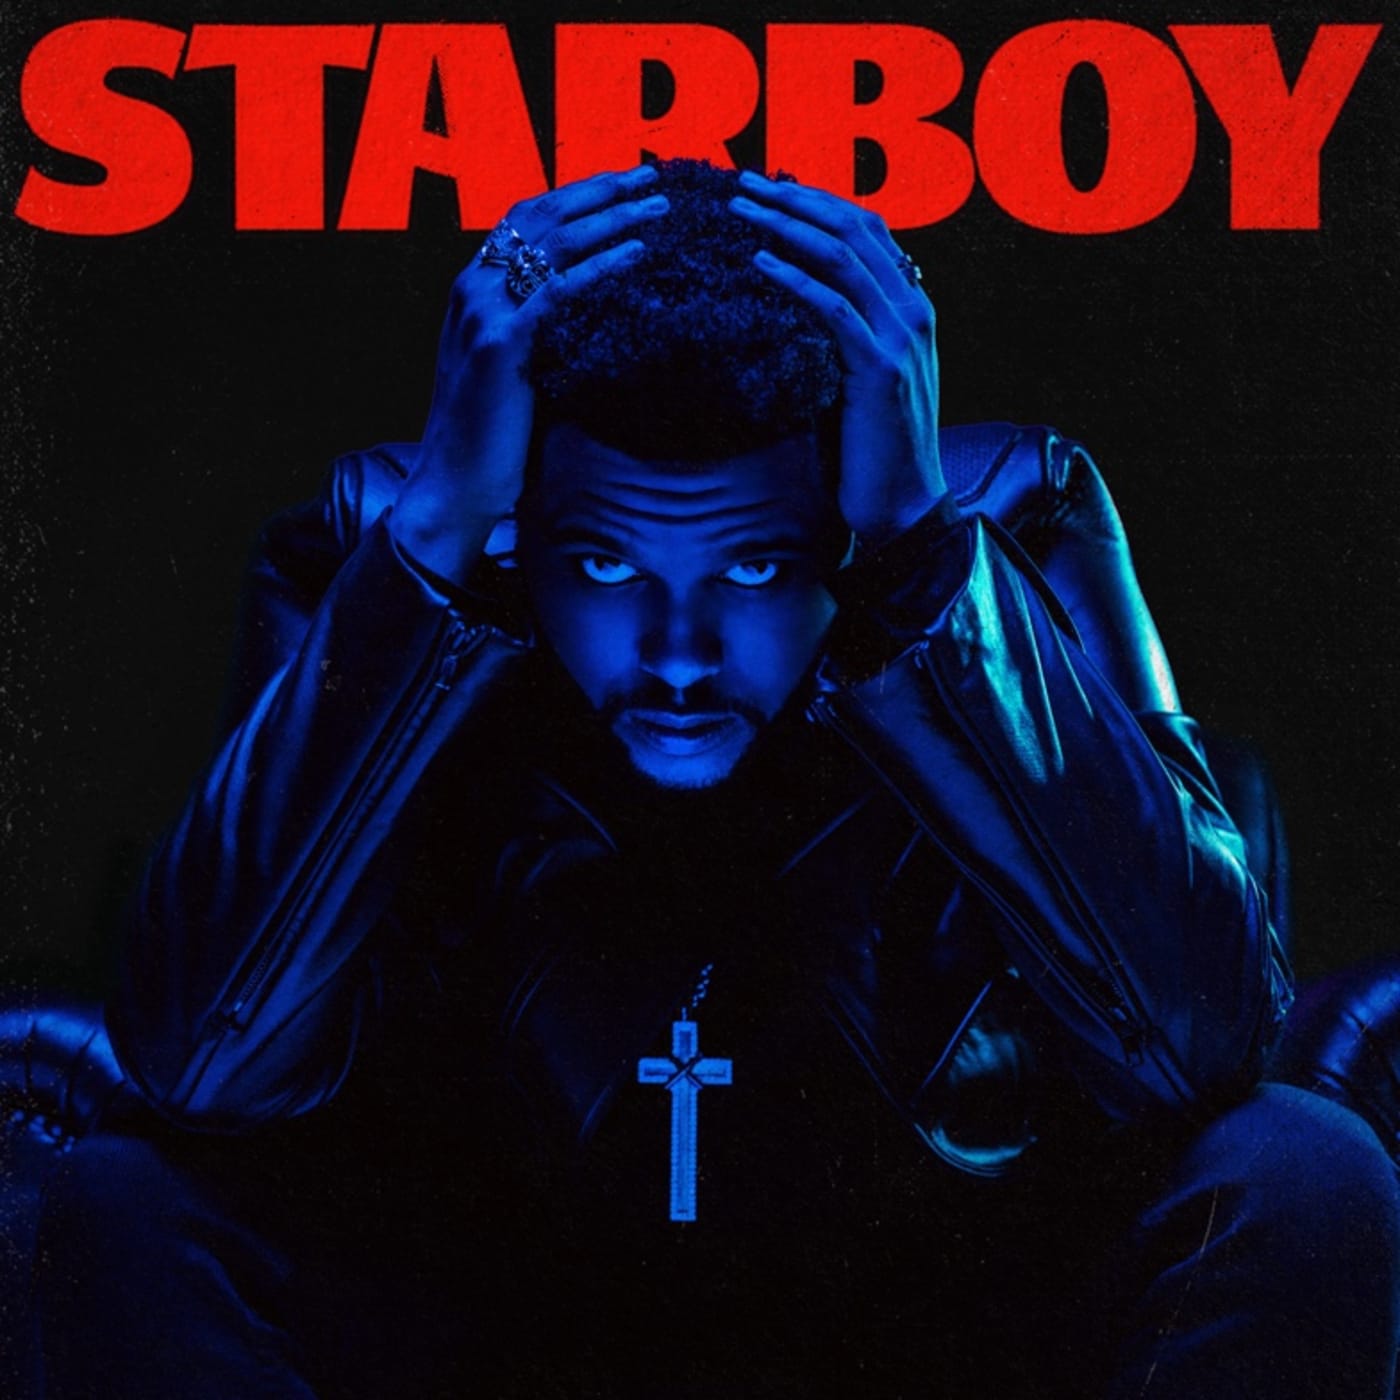 the weeknd starboy deluxe